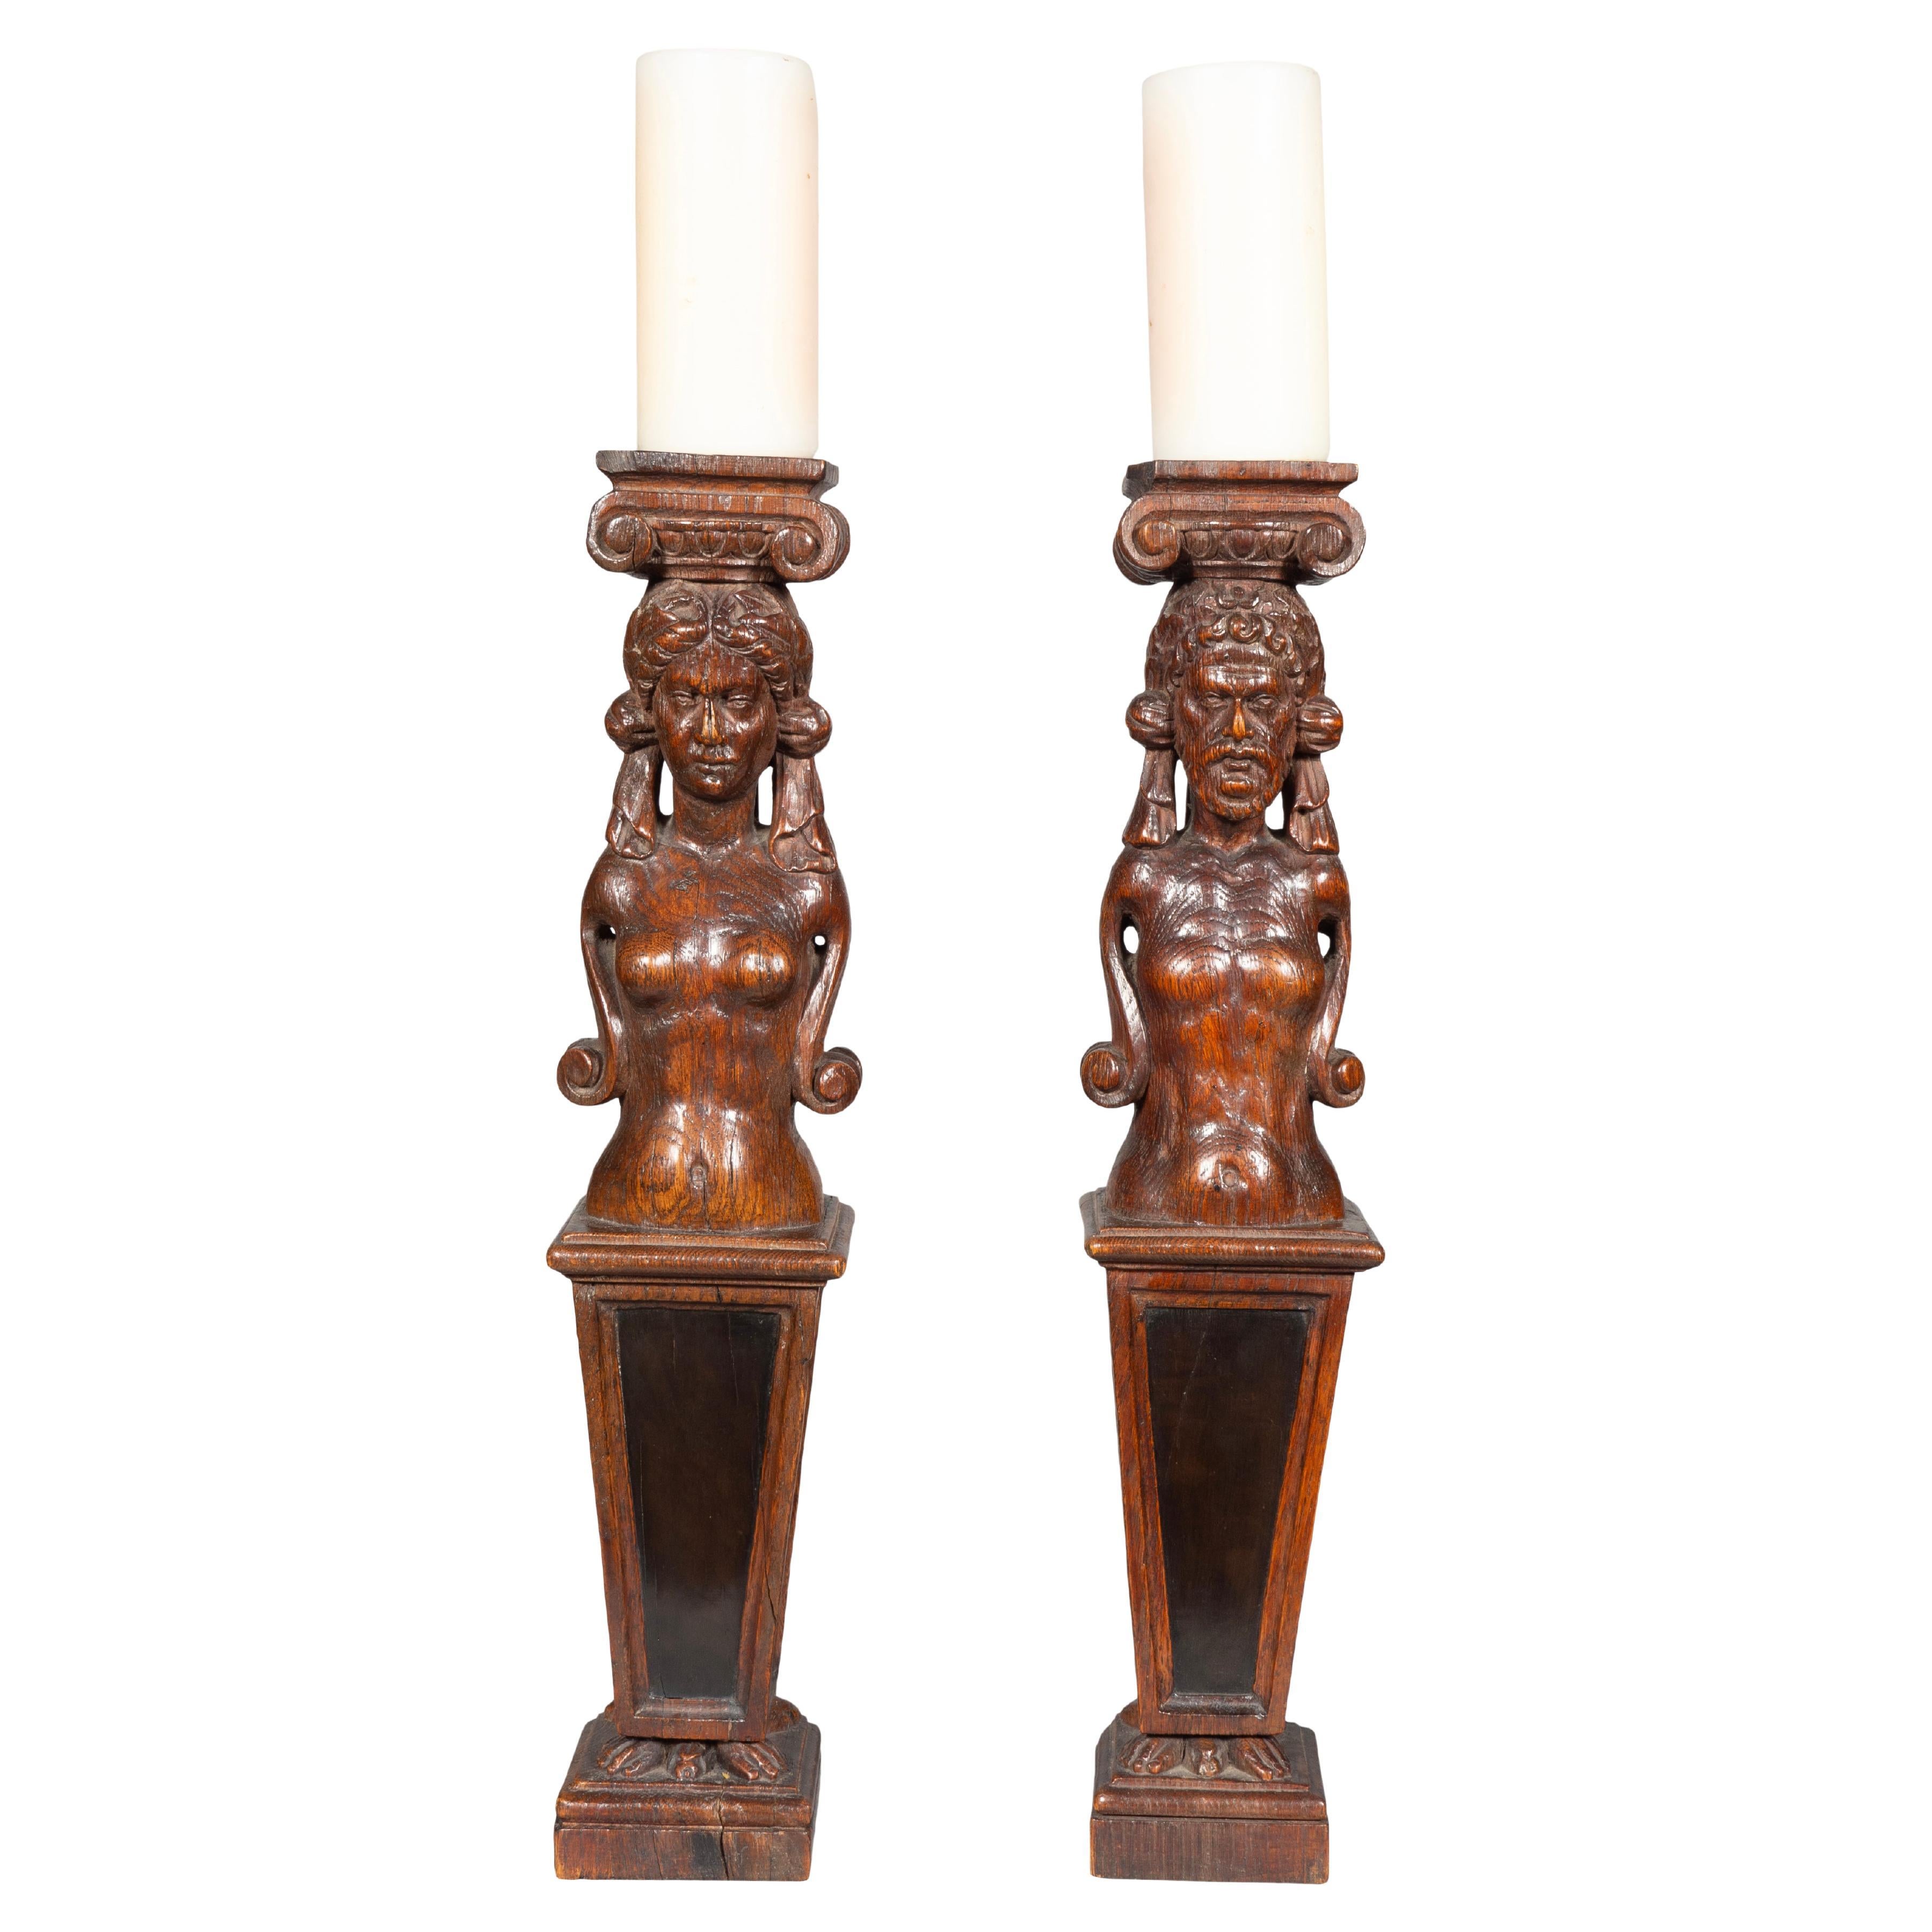 Pair Of Flemish Baroque Carved Oak And Ebony Figural Caryatids For Sale